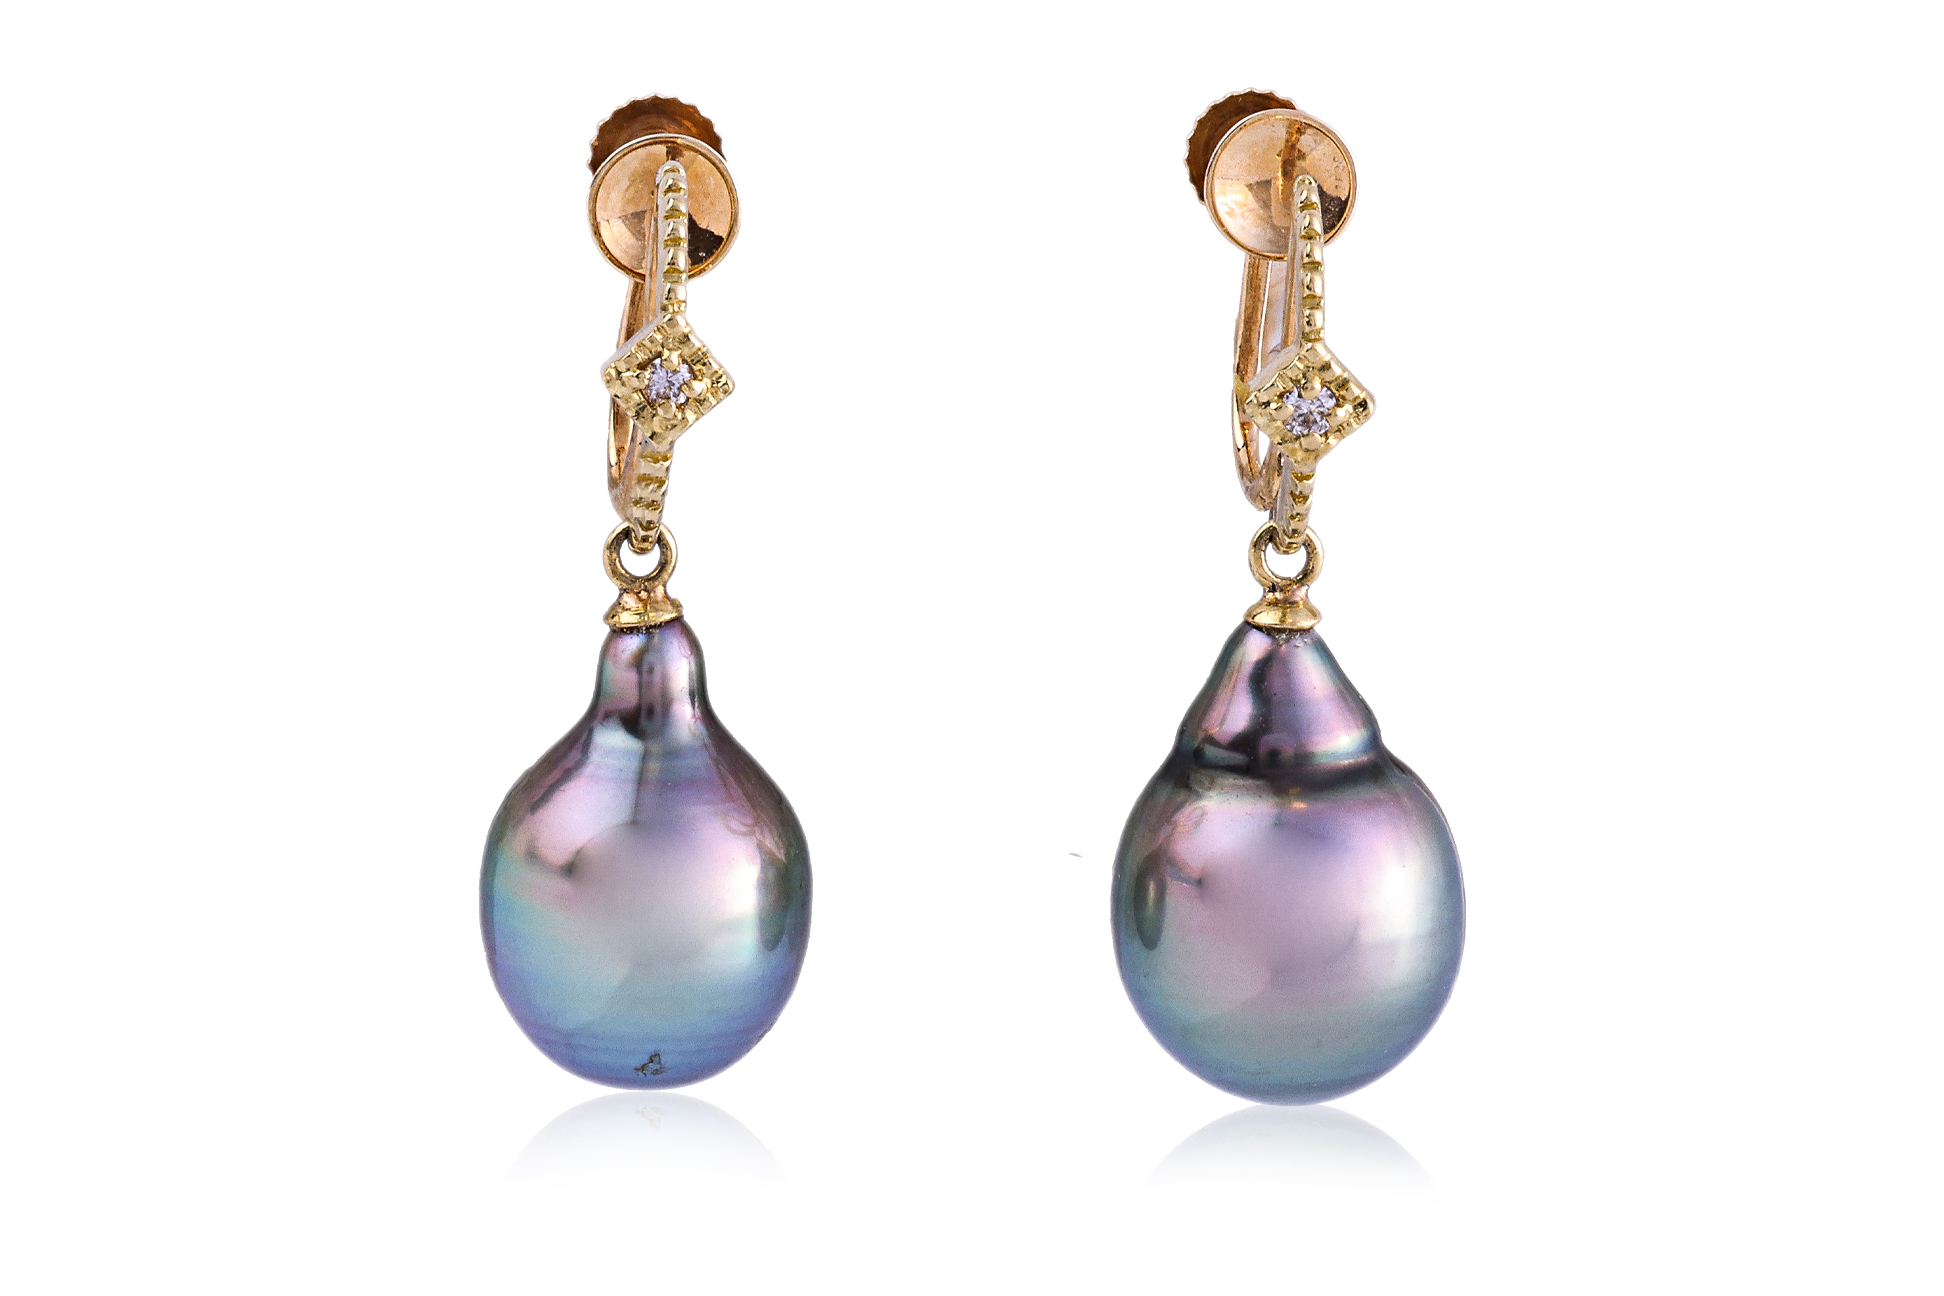 A PAIR OF CULTURED BAROQUE PEARL SCREW-BACK EARRING